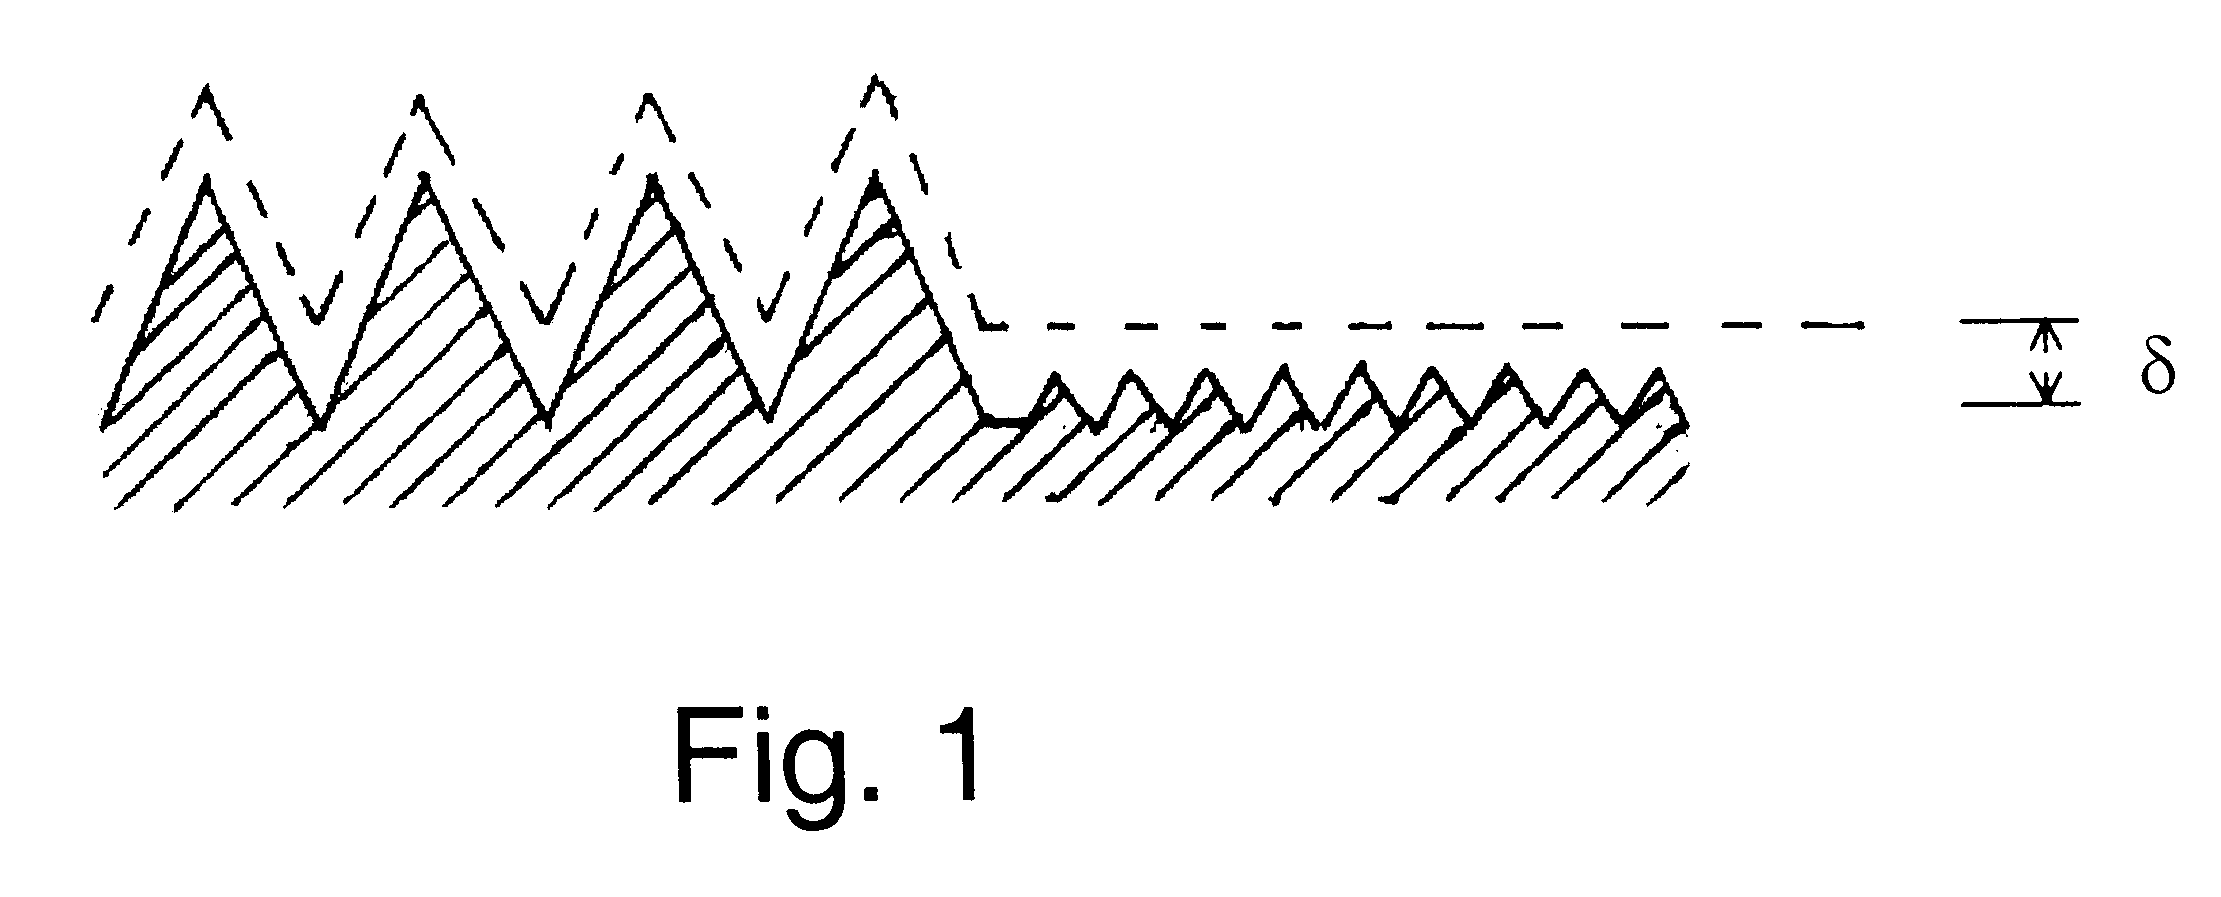 Sequential electromachining and electropolishing of metals and the like using modulated electric fields